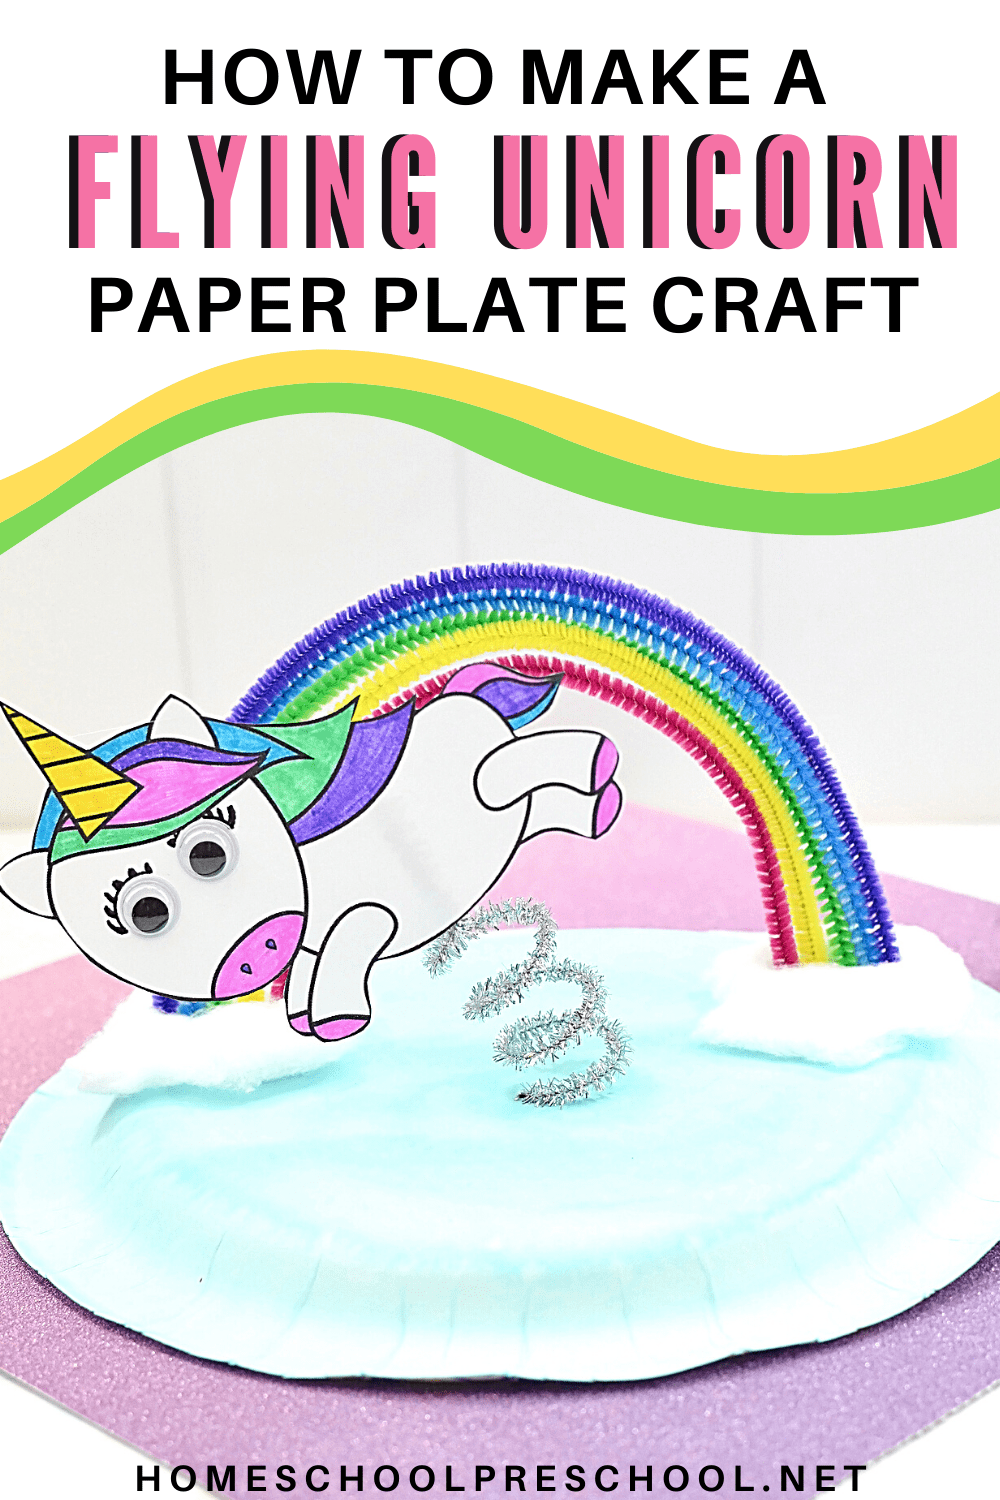 Do your kids love unicorns? If so, you NEED this unicorn paper plate craft! To make it easy for you, I've got a free unicorn template for you, too!